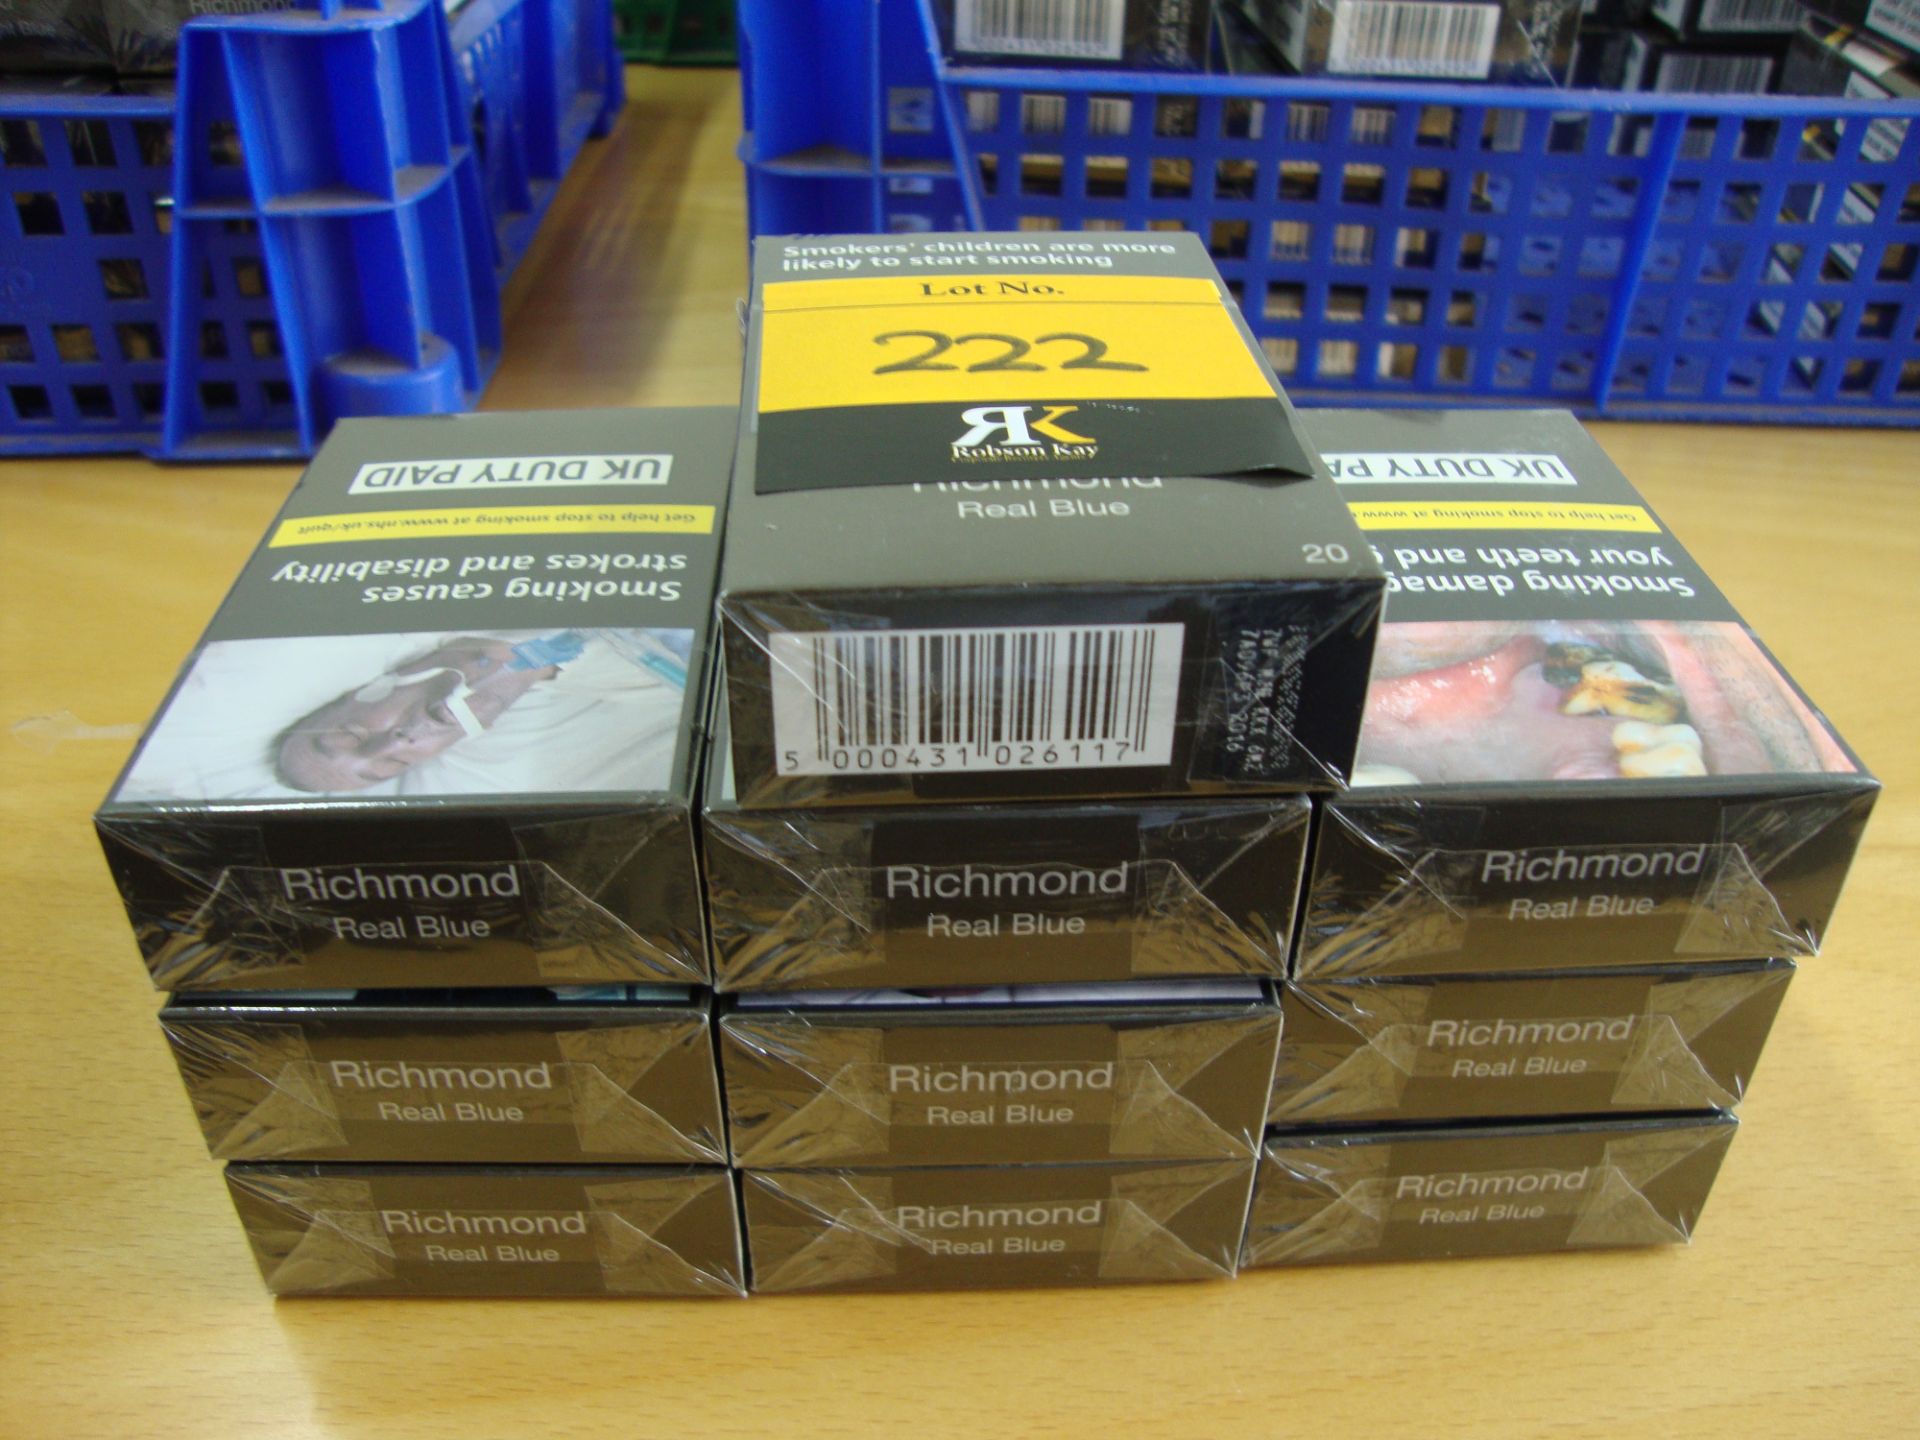 10 packs of Richmond Real Blue cigarettes NB. All pack sizes 20